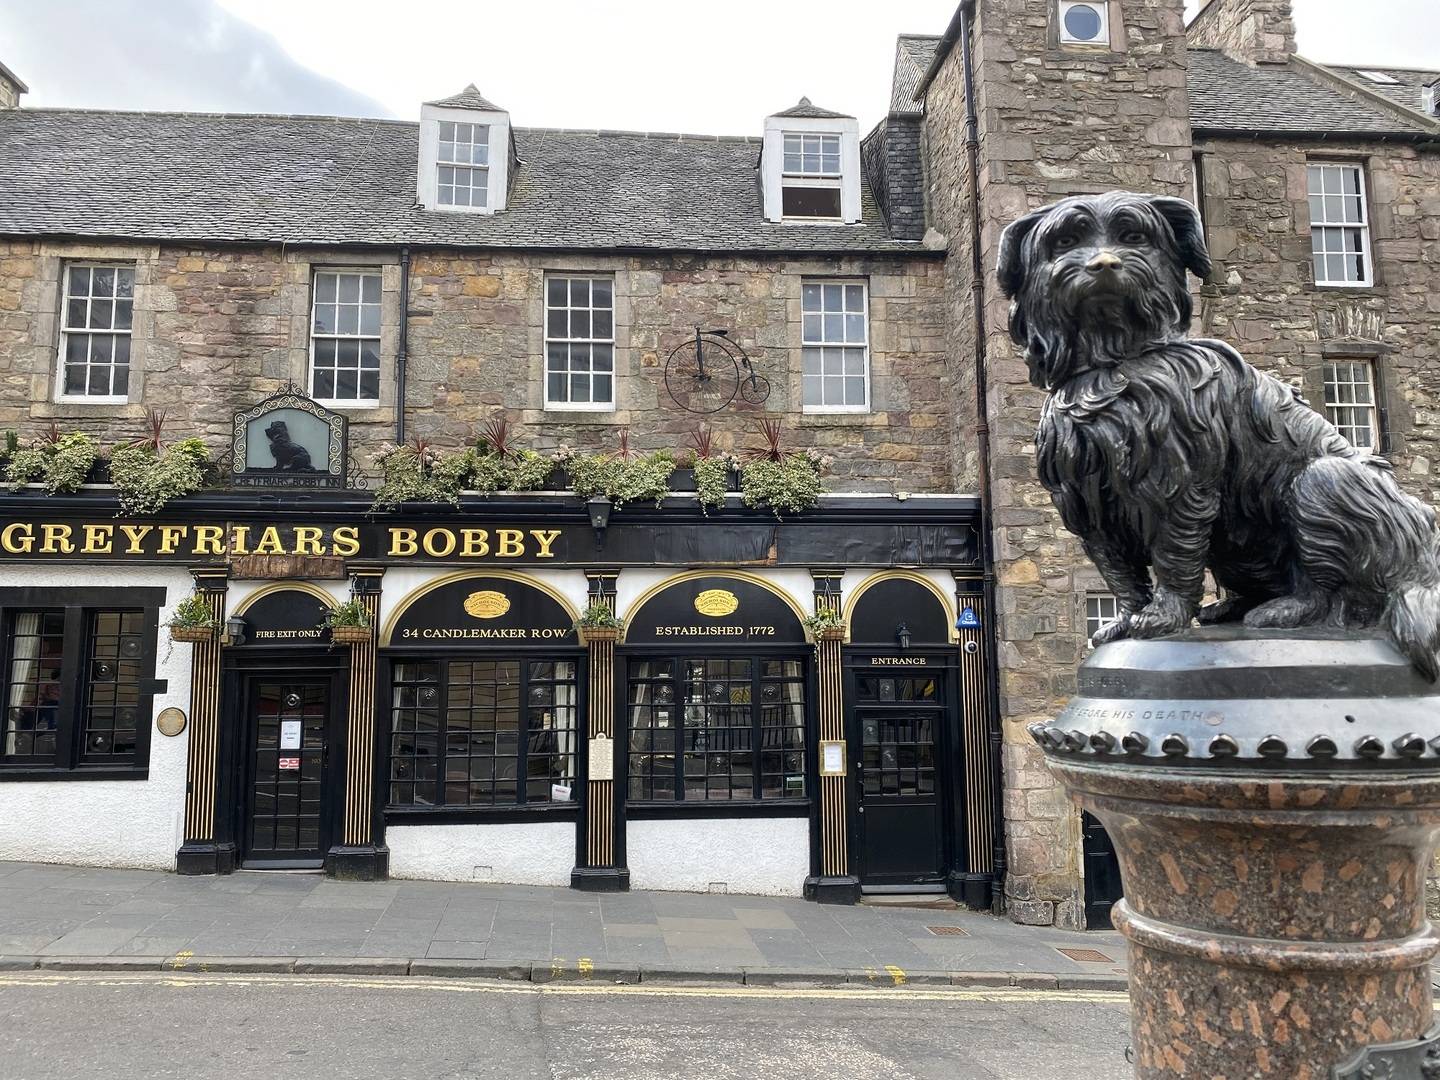 Greyfriars Bobby Statue with Greyfriars Bobby pub in background